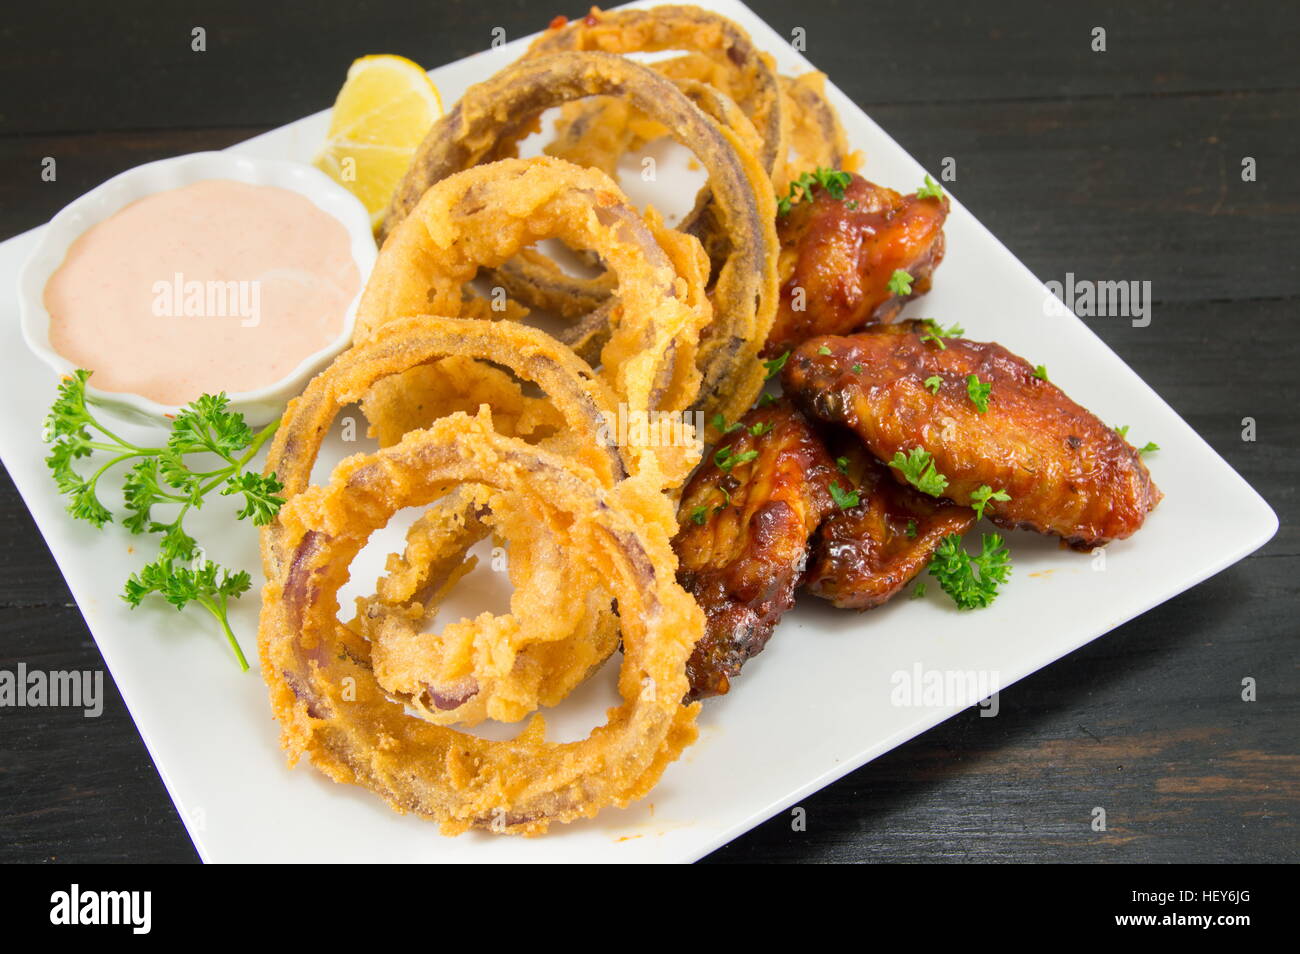 onion rings, barbecue wings and homemade dip Stock Photo